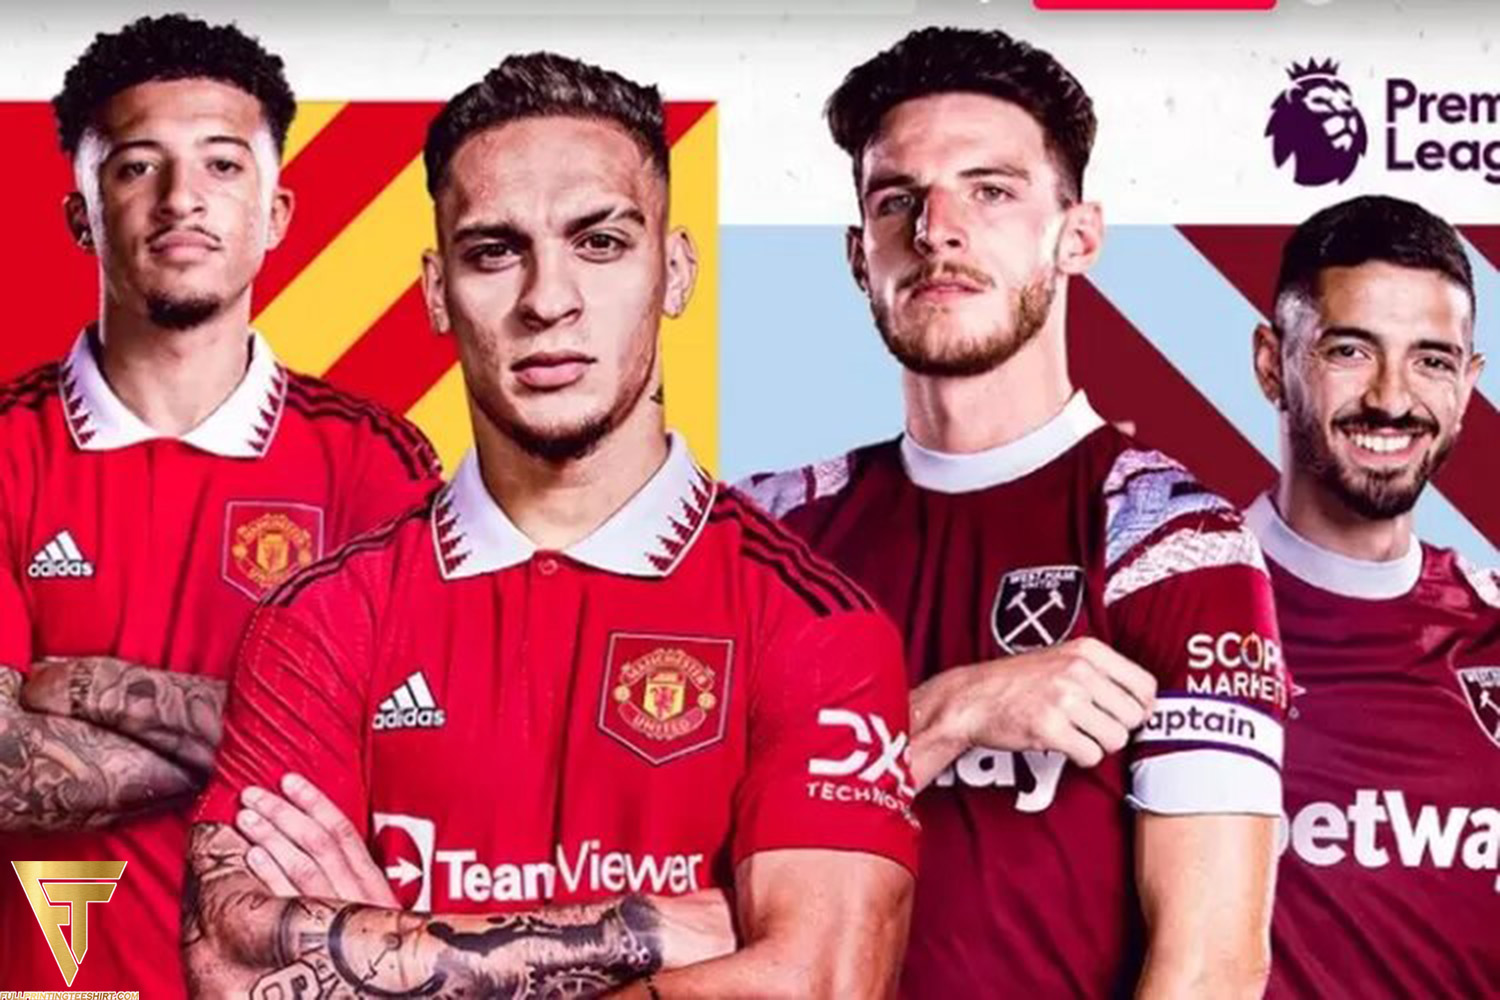 The Battle at Old Trafford Manchester United vs West Ham United in Premier League Showdown